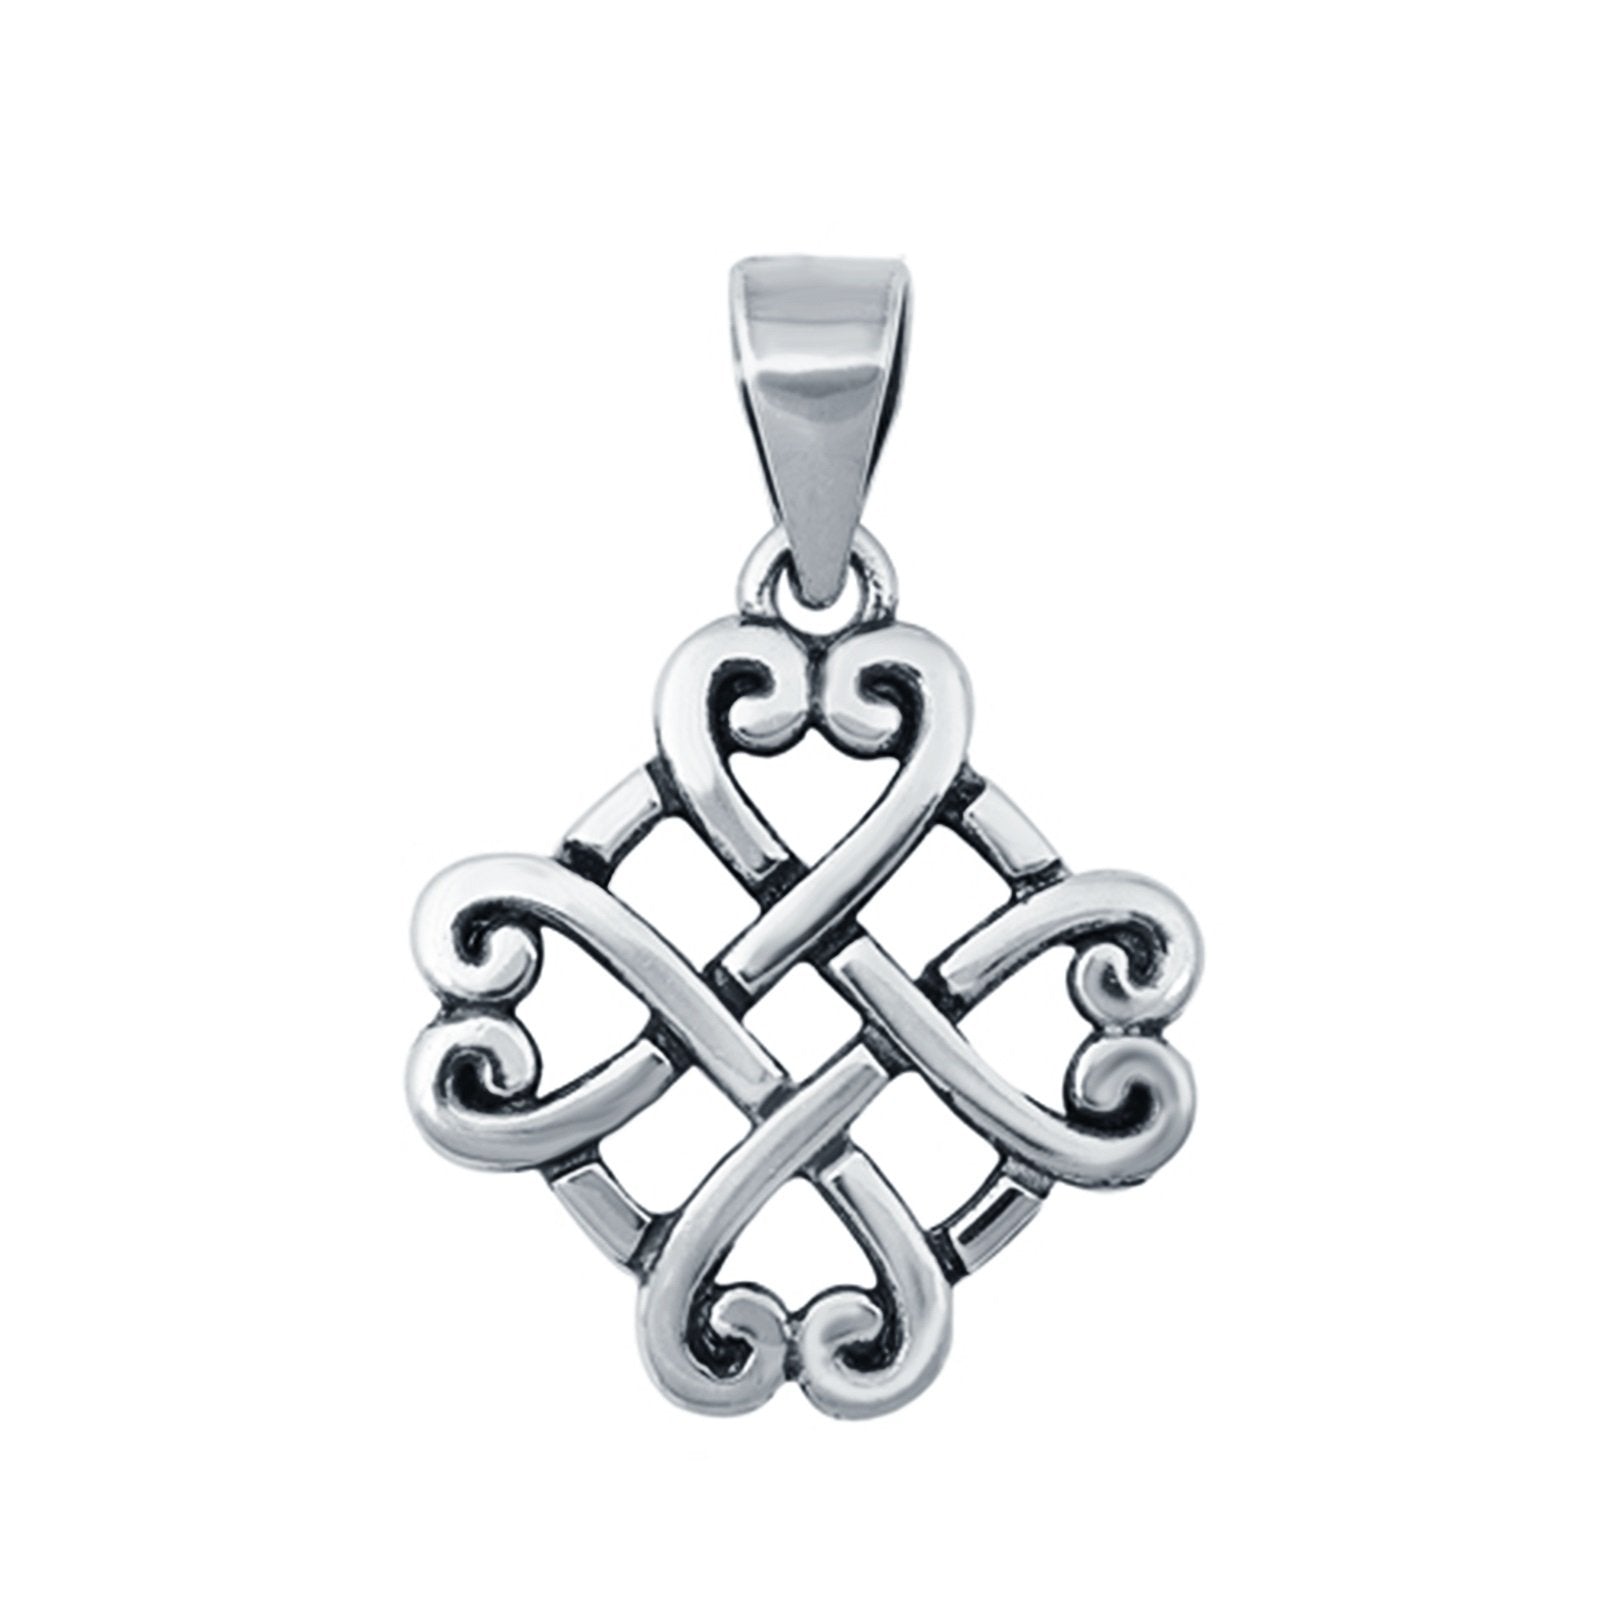 Fashion Jewelry Silver Celtic Charm Pendant 925 Sterling Silver (14mm)